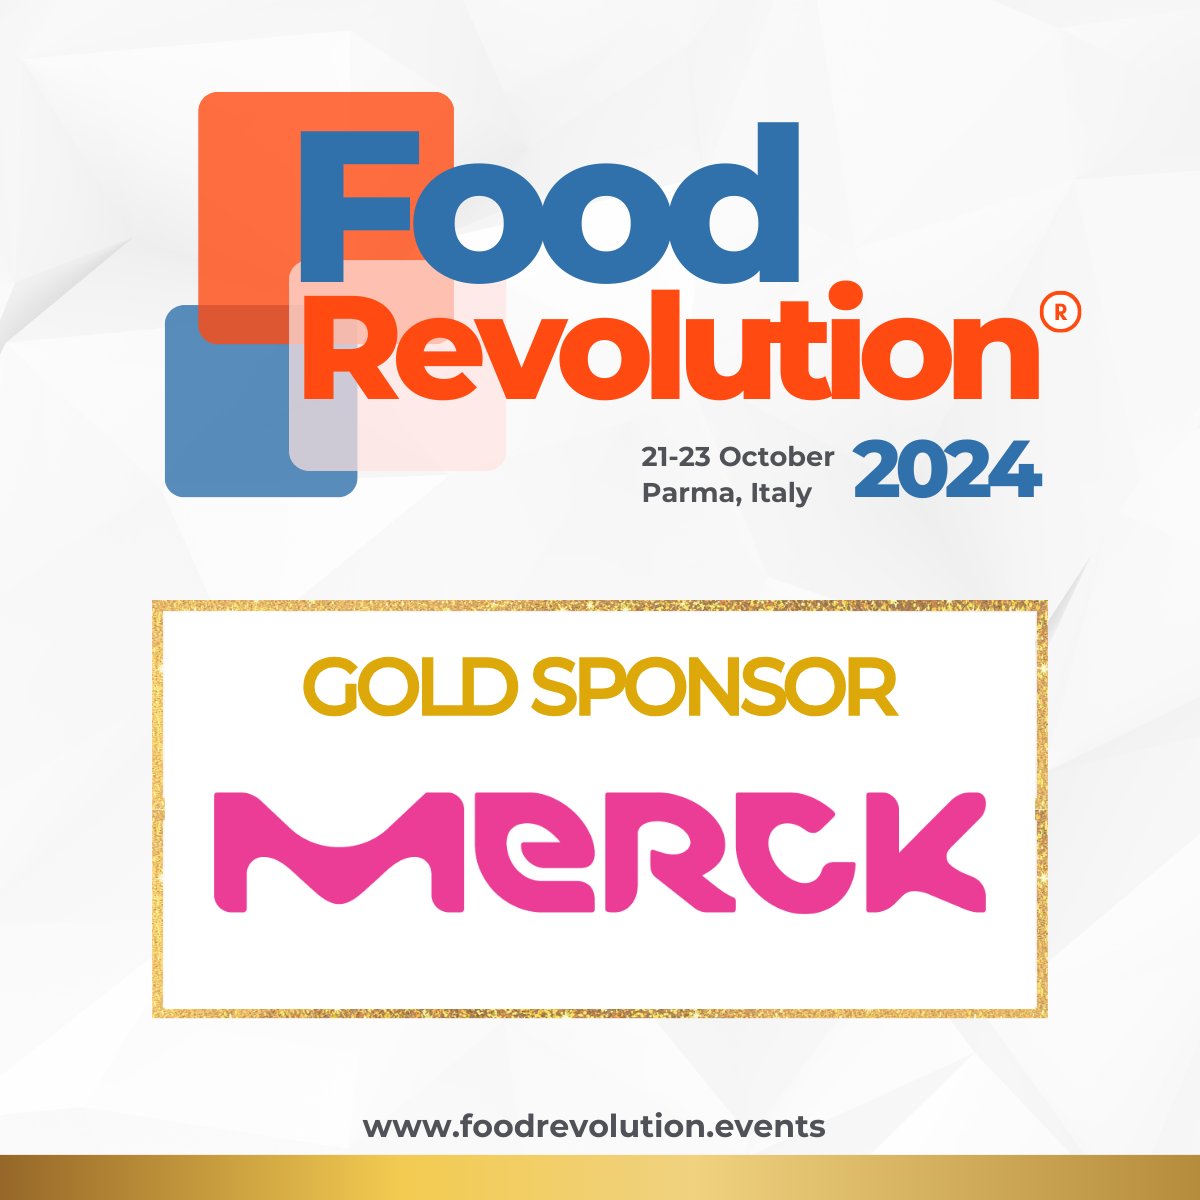 Please join us in welcoming Merck Life Science, a vibrant life science and technology company, as one of our esteemed gold sponsors!

Stay tuned for more updates about #FoodRevolution2024 and mark these dates 21-23 October on your calendars! See you in Parma (IT)!

@merckgroup